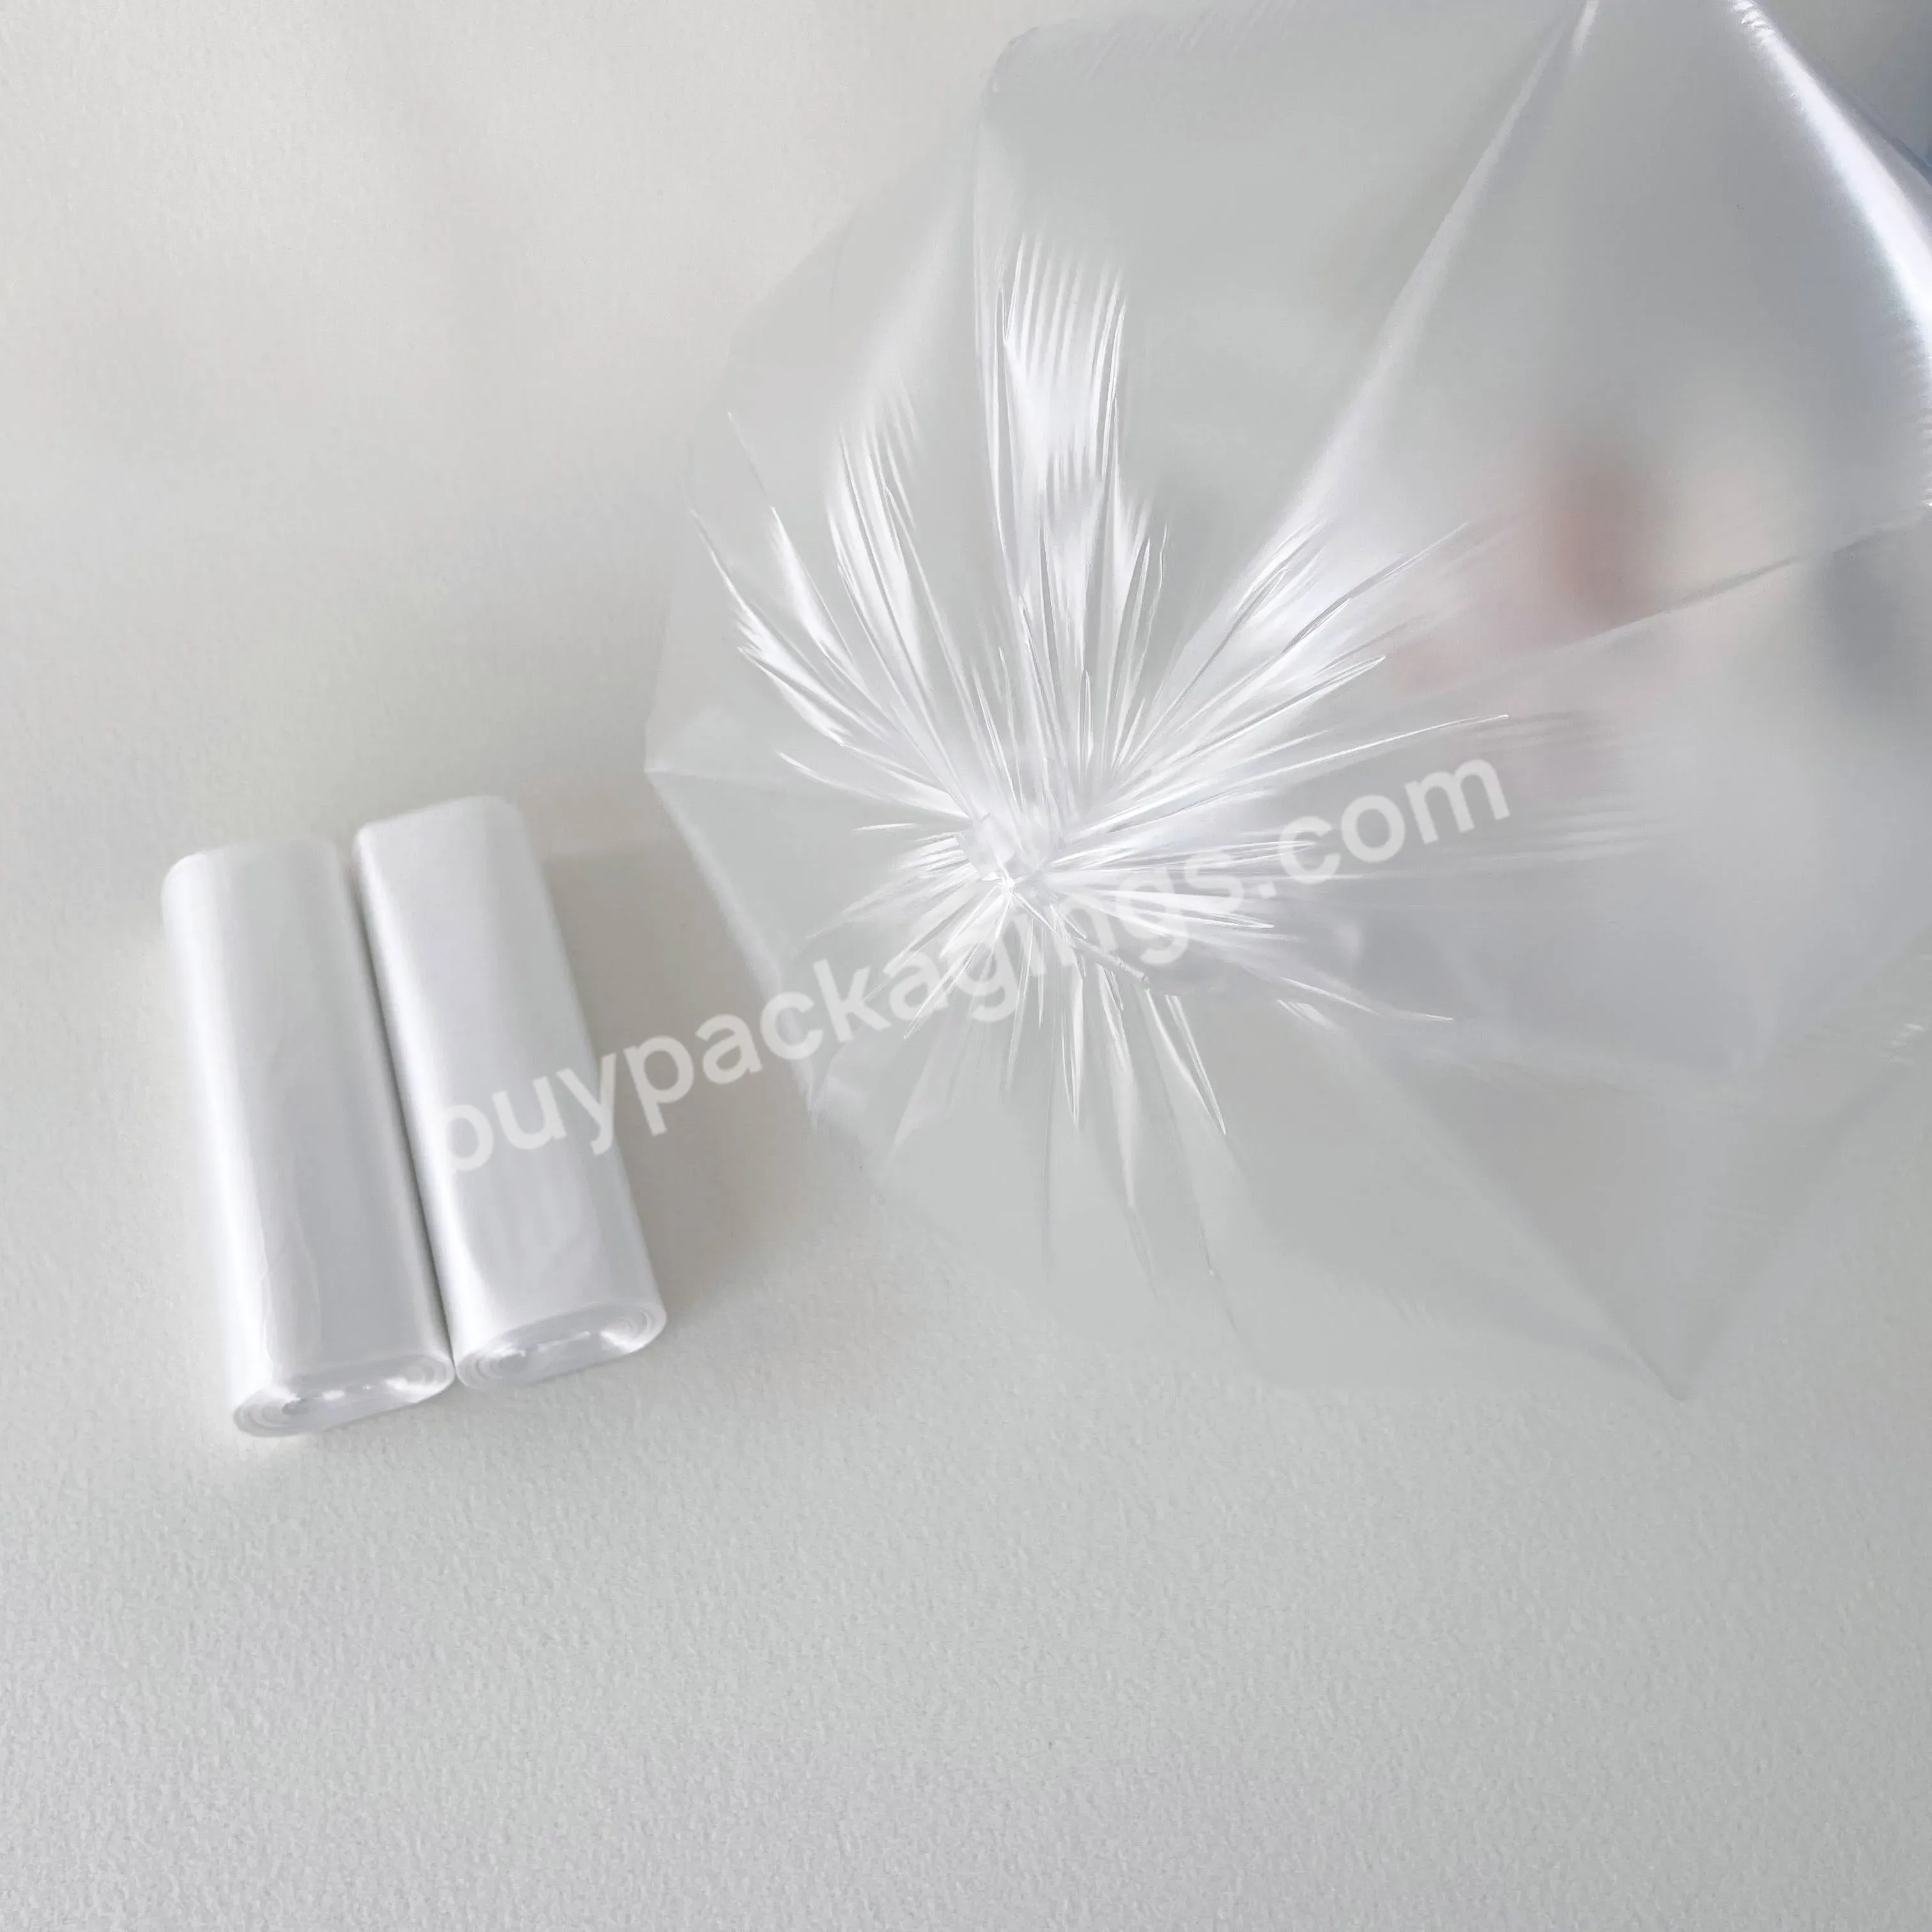 Wholesale Plastic Roll Garbage Packaging Heavy Duty Plastic Trash Disposable Transparent Can Linger Bags - Buy Wholesale Plastic Roll Garbage Packaging Bag,Plastic Disposable Transparent Garbage Bags,Heavy Duty Plastic Trash Garbage Can Liner Bag.